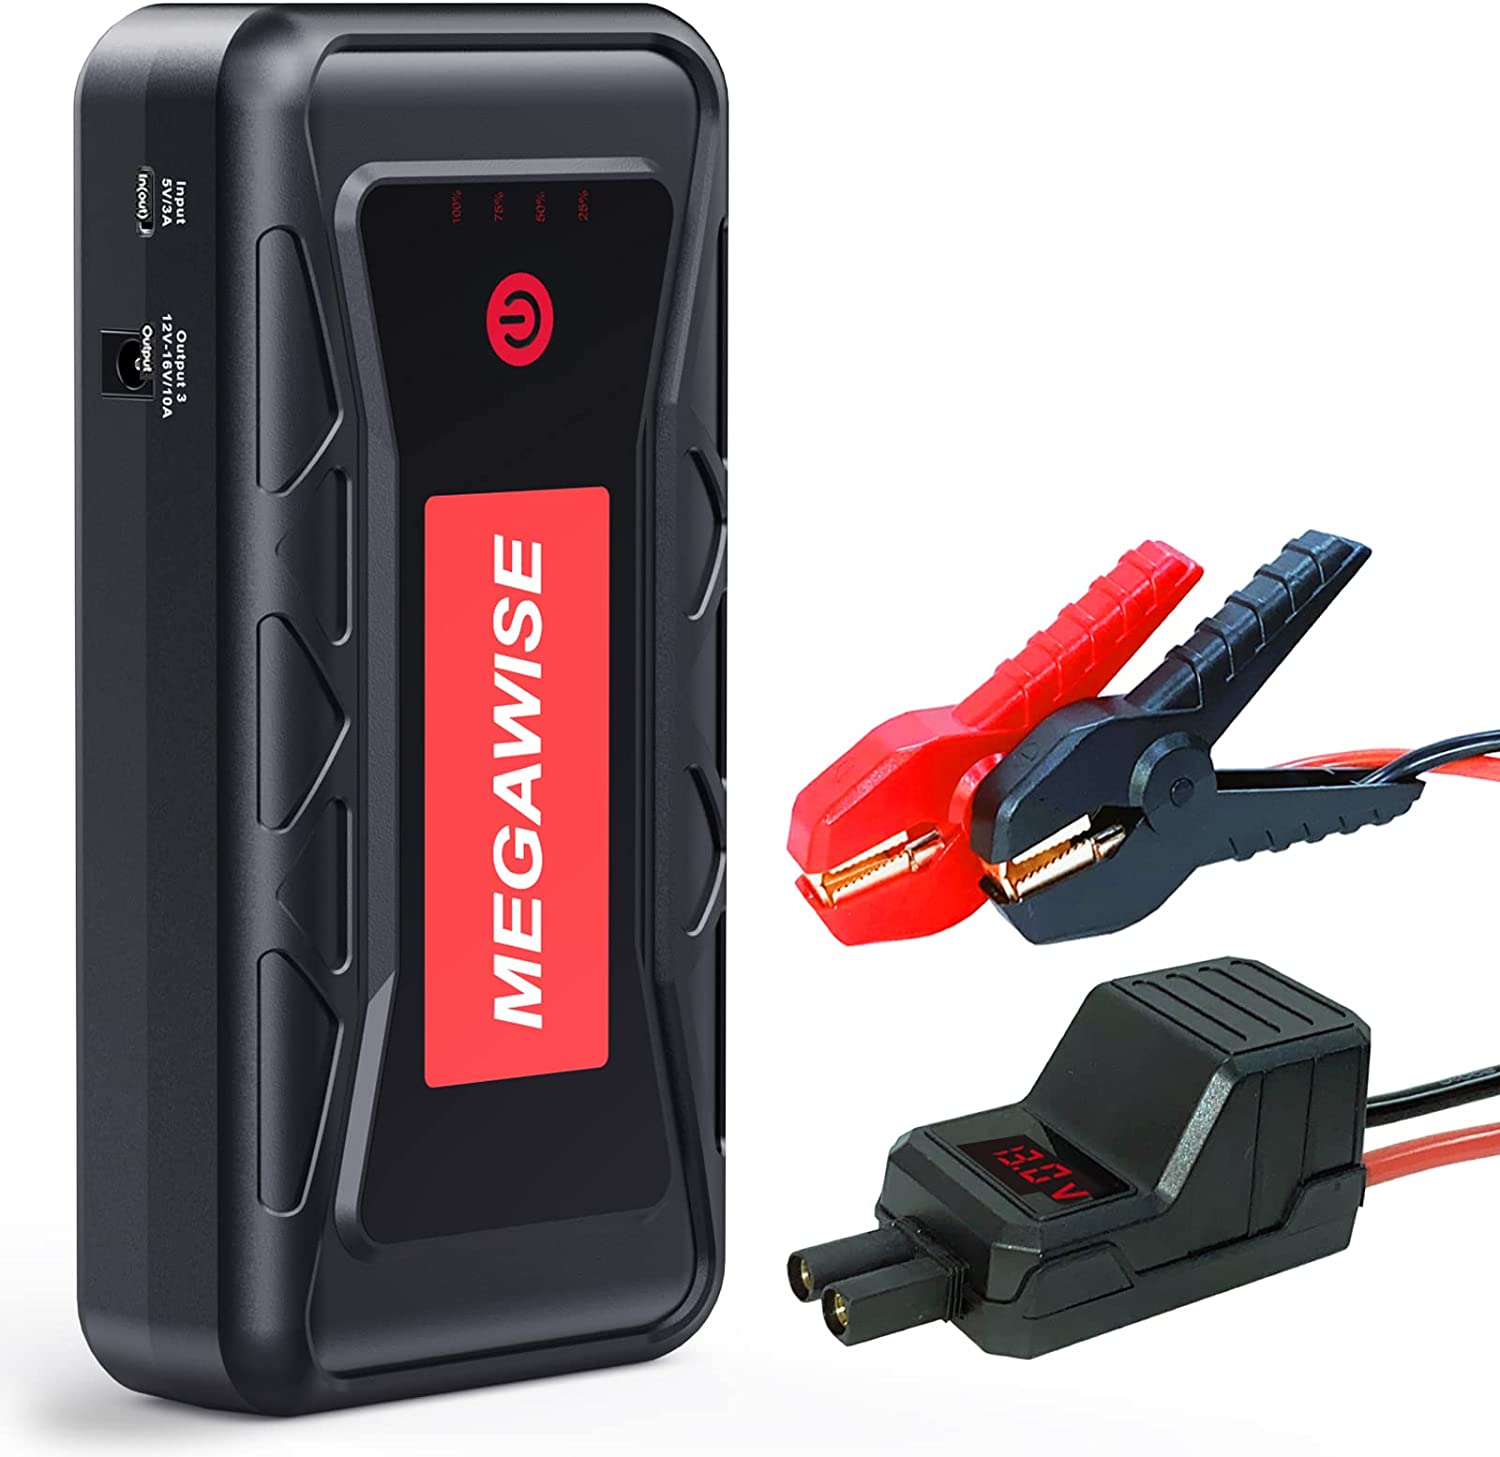 MEGAWISE 2500A Peak 21800mAh Car Battery Jump Starter (up to 8.0L Gas/6.5L Diesel Engines)